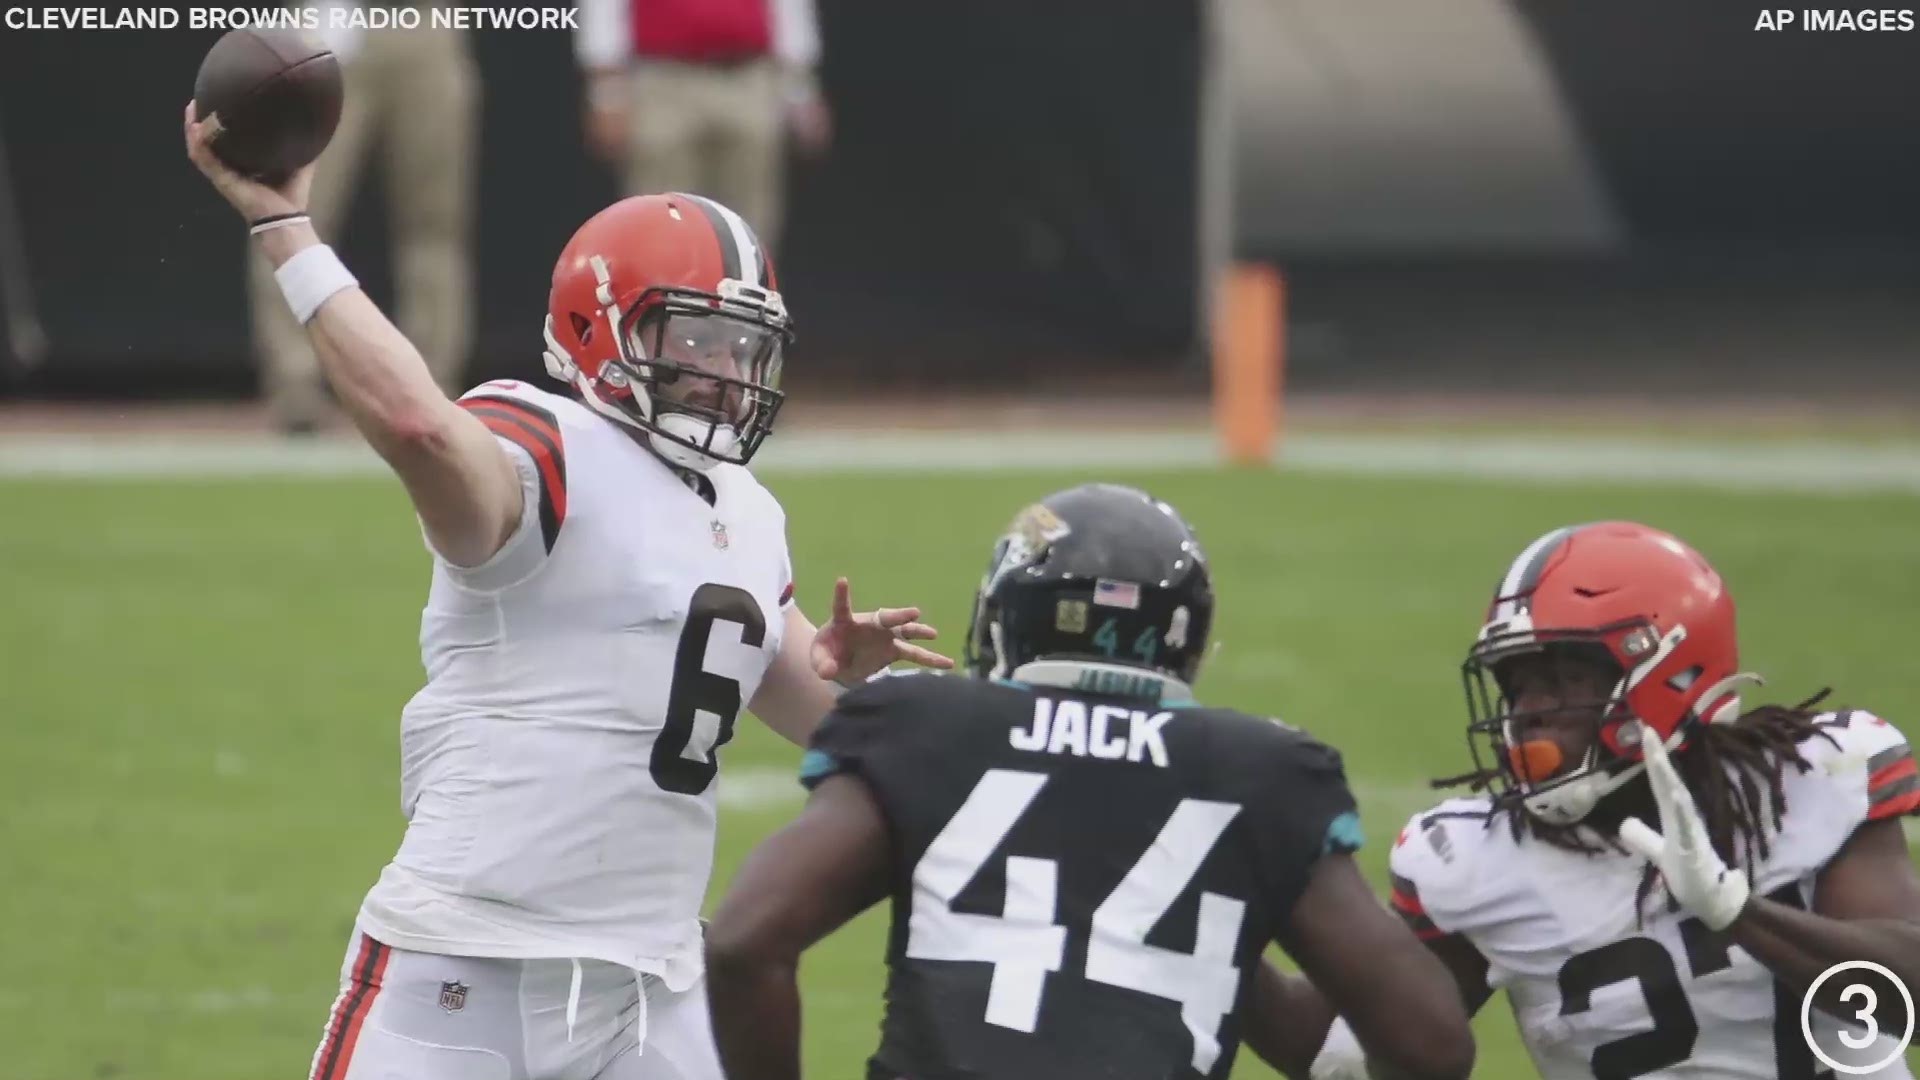 The Cleveland Browns regained a lead over the Jacksonville Jaguars when Baker Mayfield found Austin Hooper for a second-quarter touchdown.